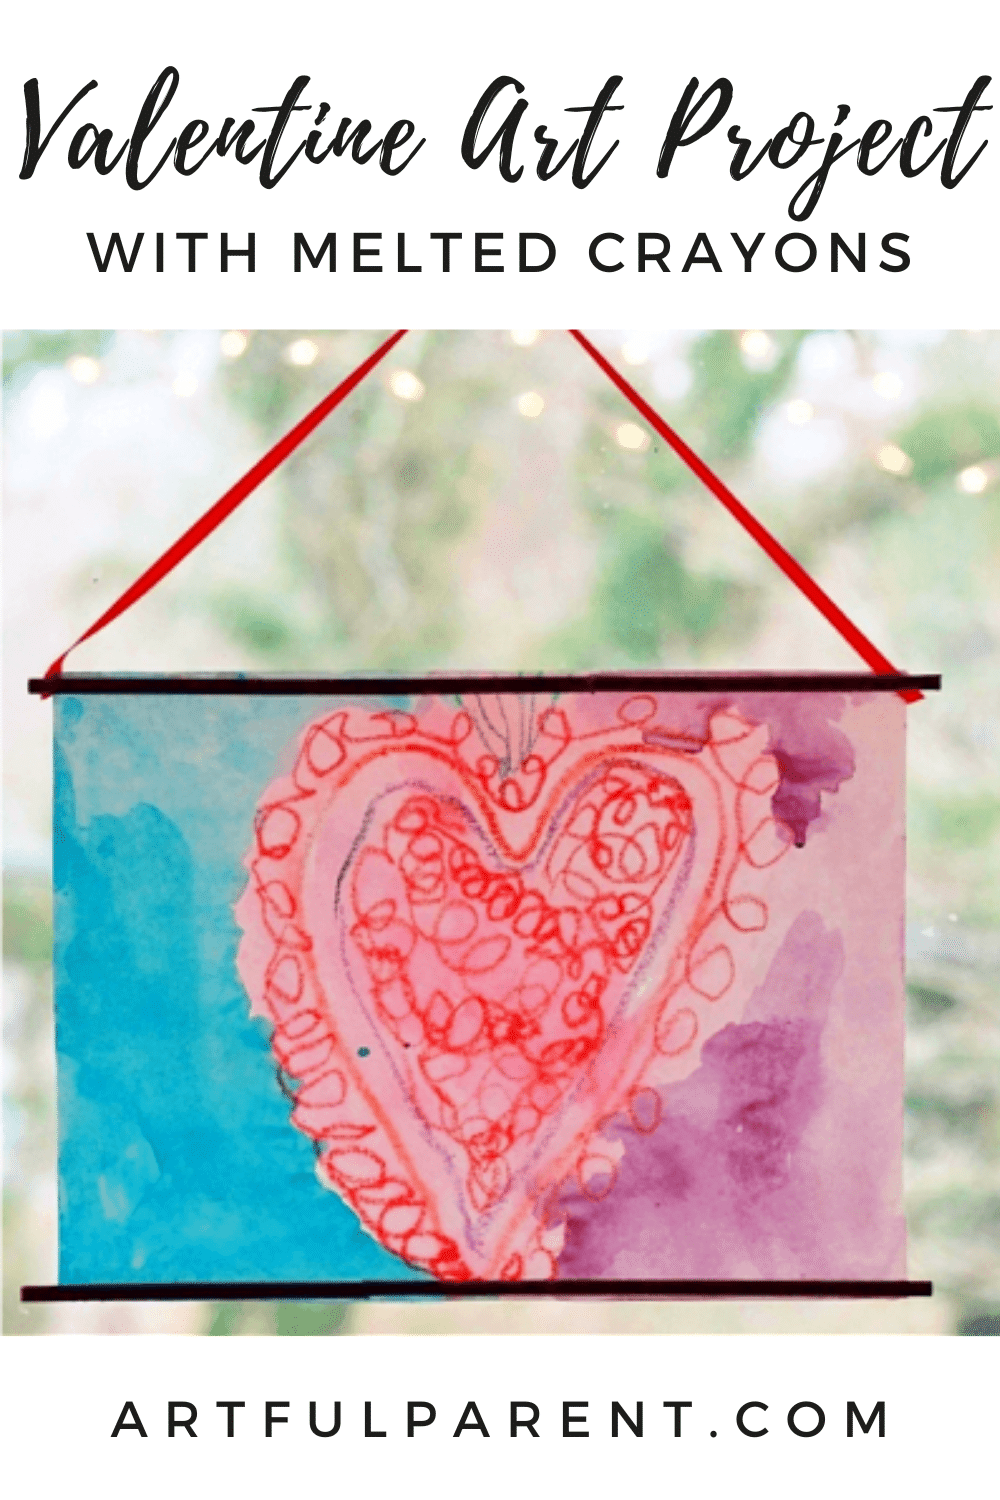 A Valentine Art Project with Melted Crayons